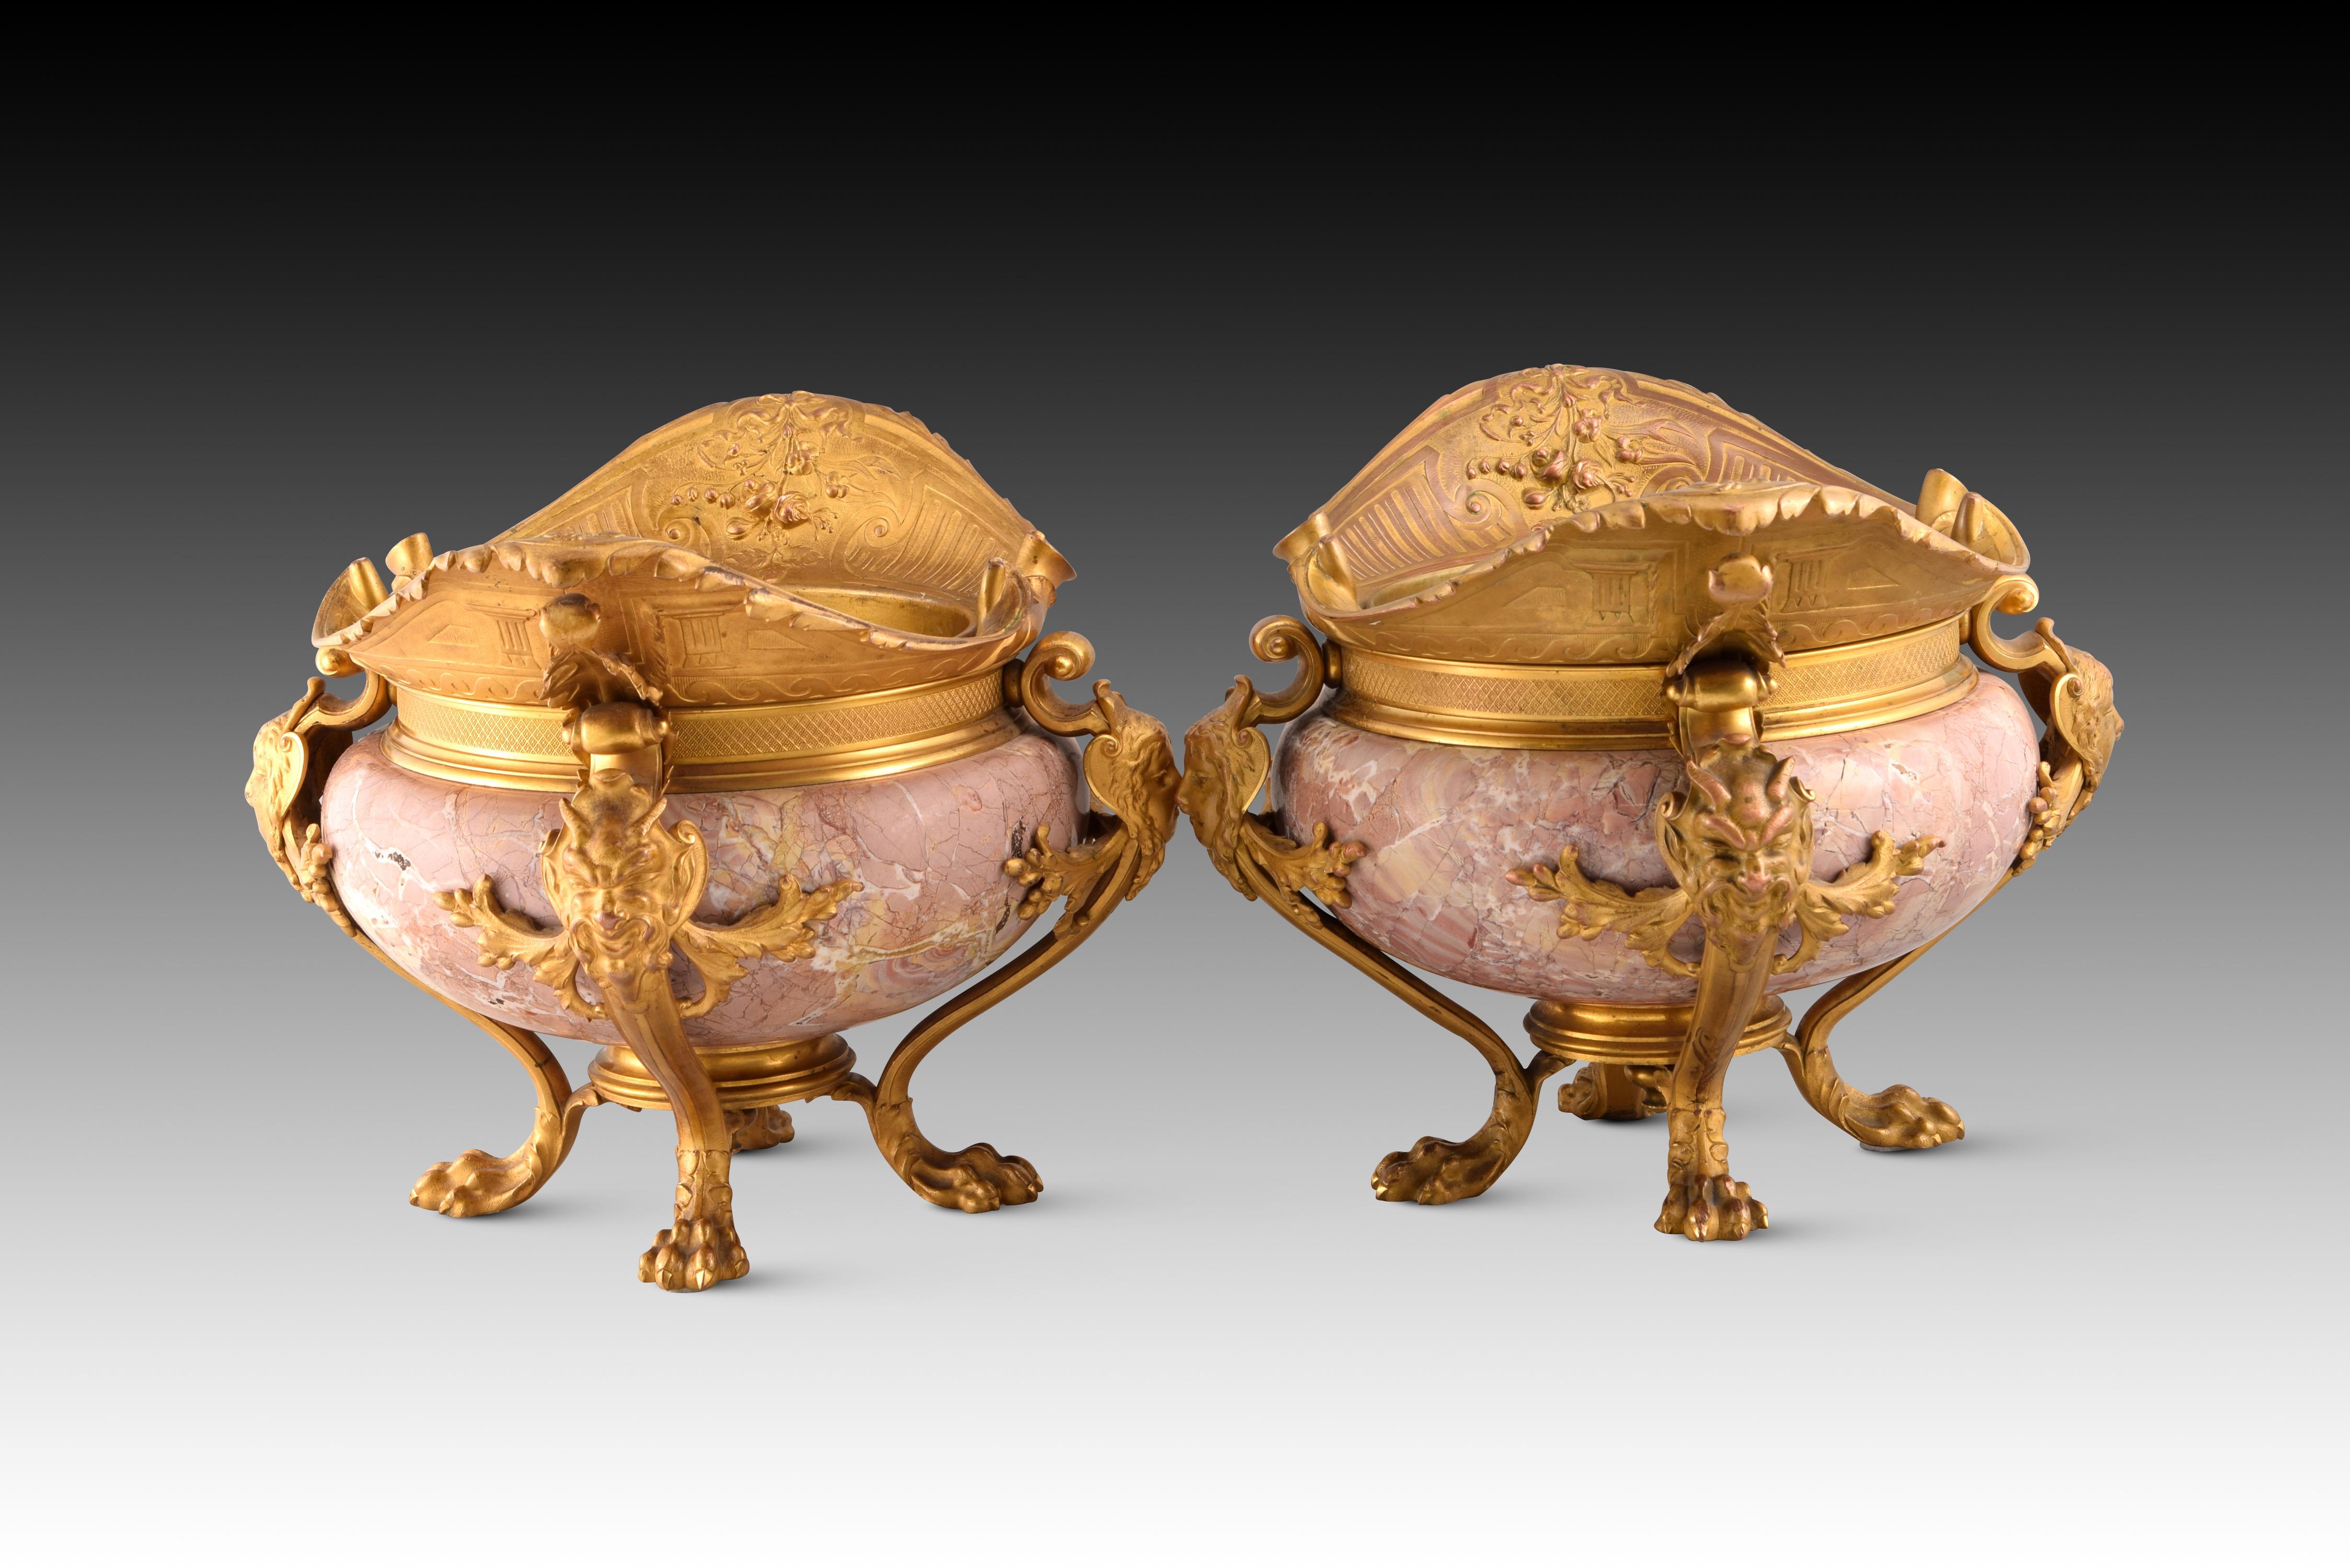 Neoclassical Revival Pair of Centerpieces. Ormolu, Marble. France, Late 19th Century